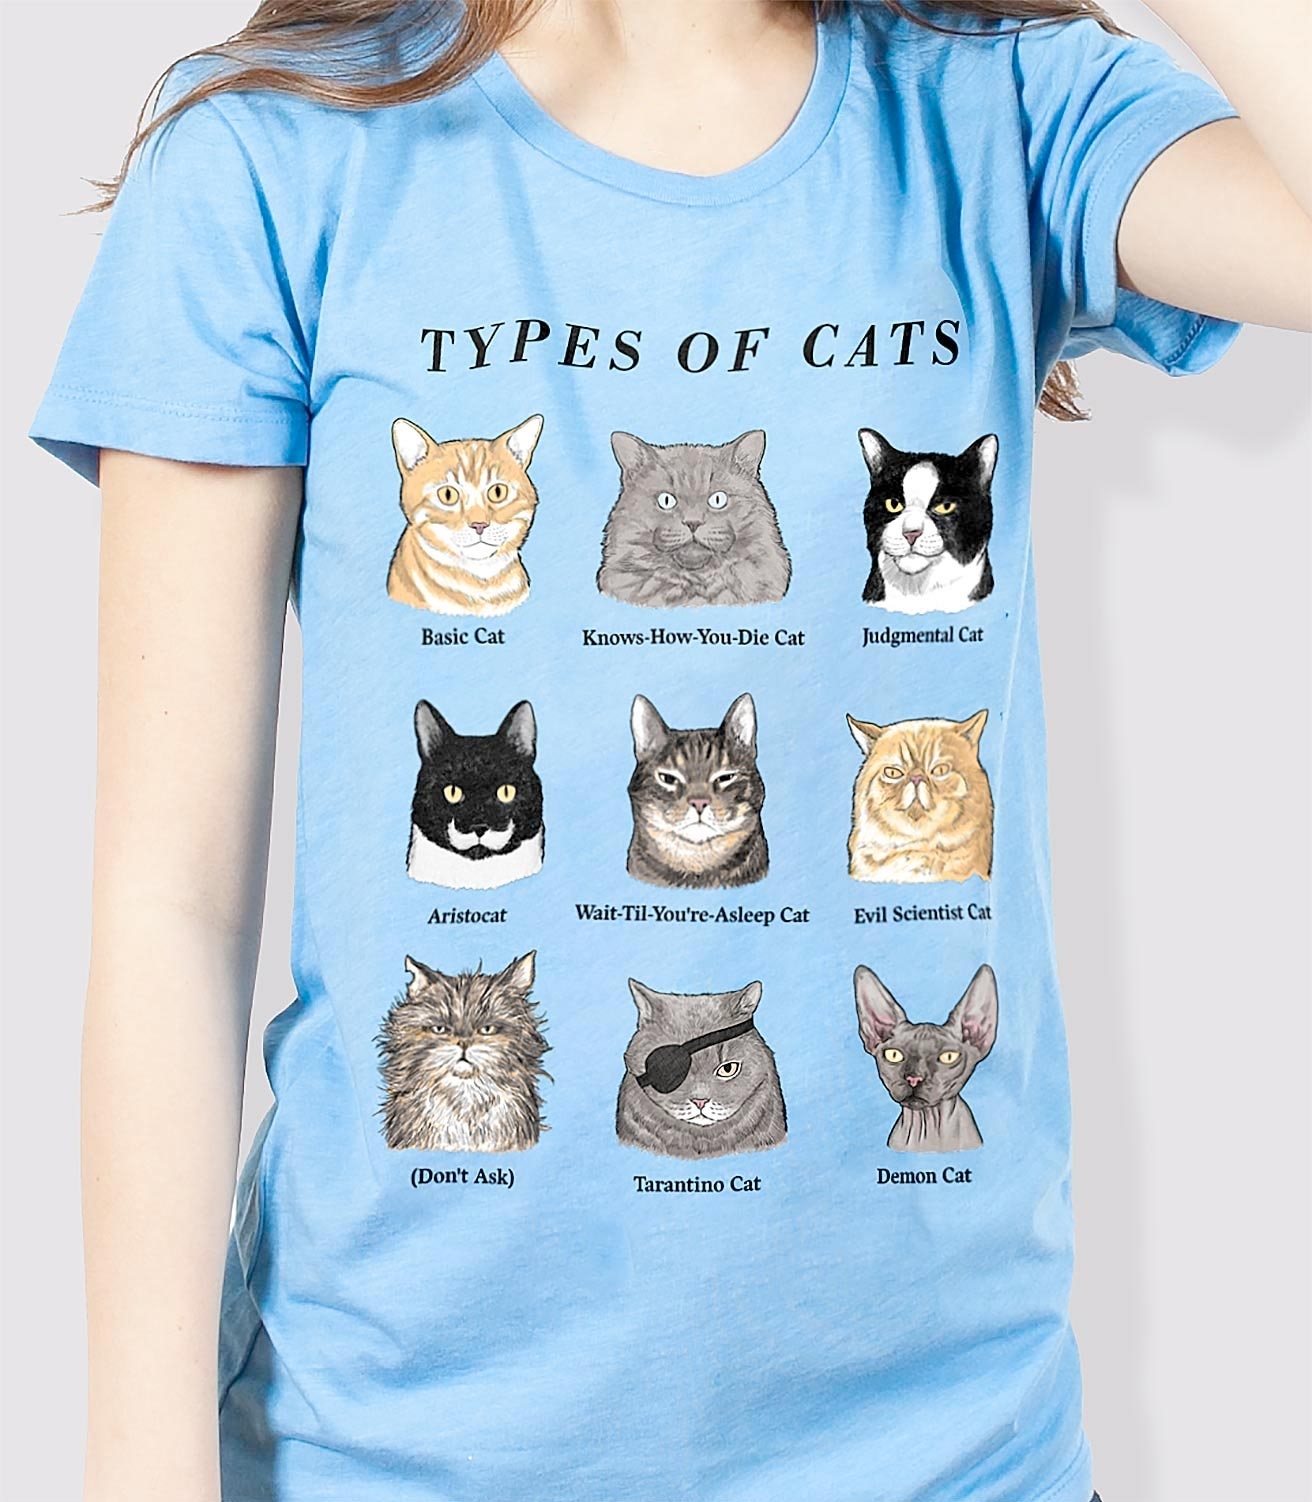 Types of Cats Funny Women's Cotton/Poly T-Shirt | Headline Shirts